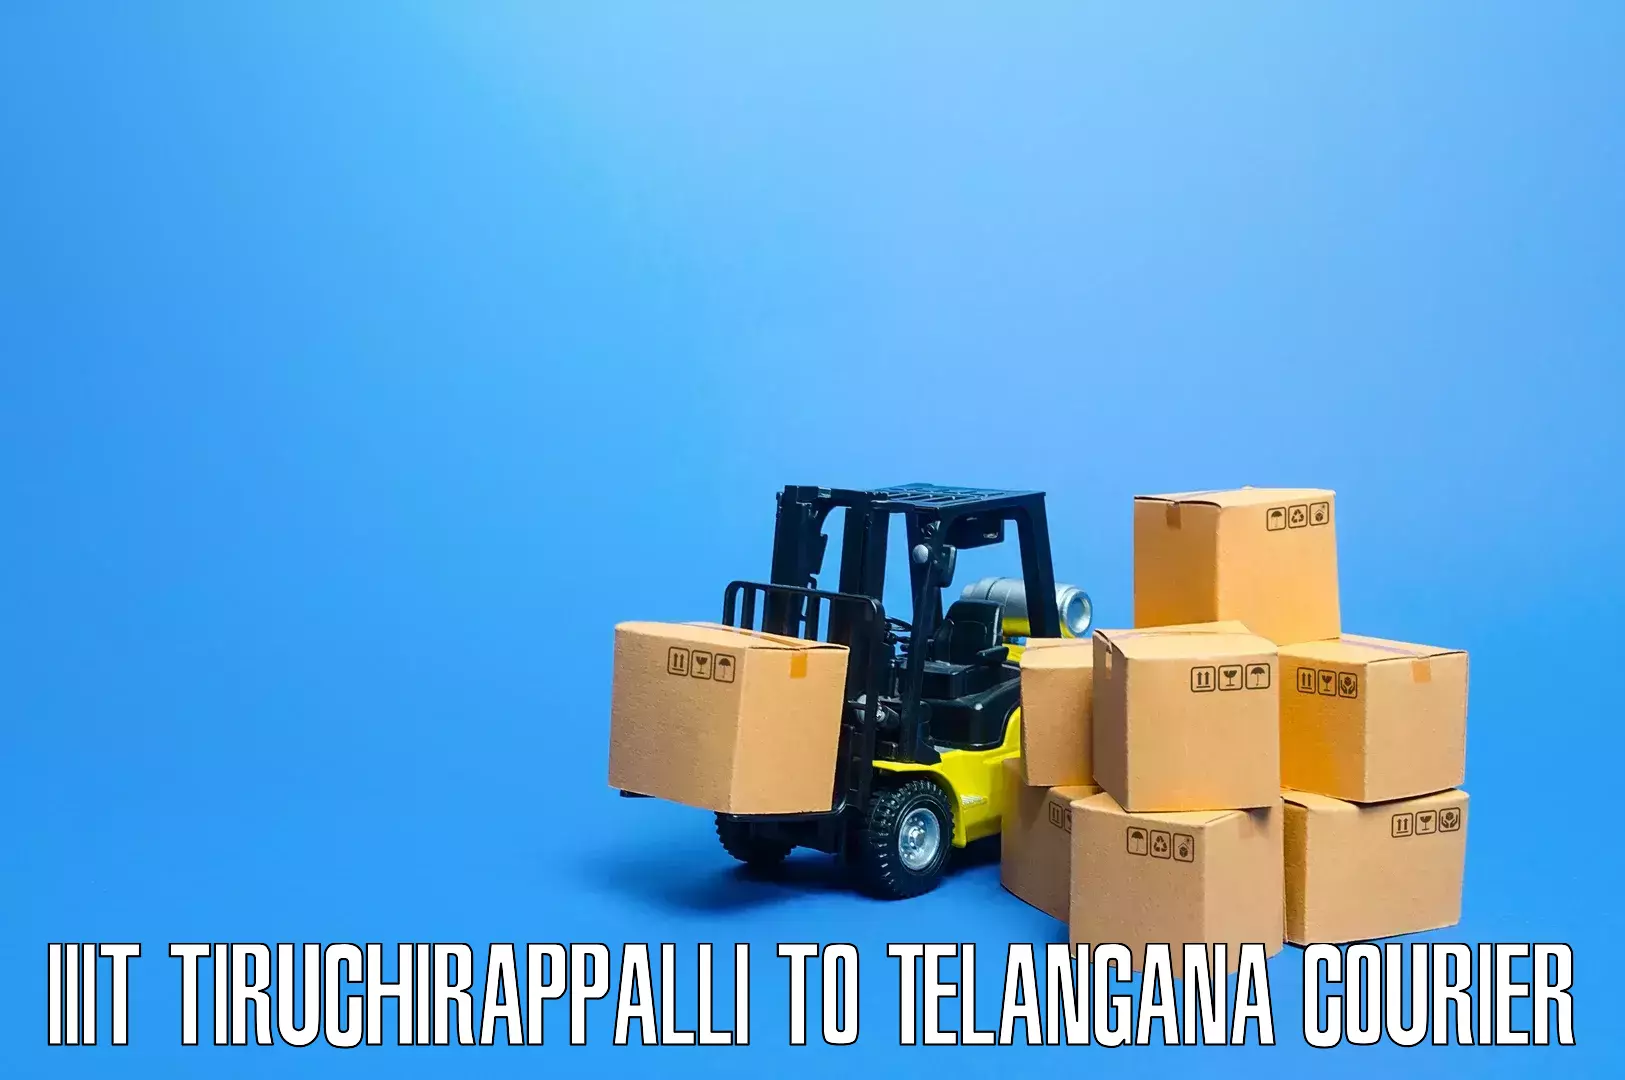 Efficient packing and moving IIIT Tiruchirappalli to Makthal